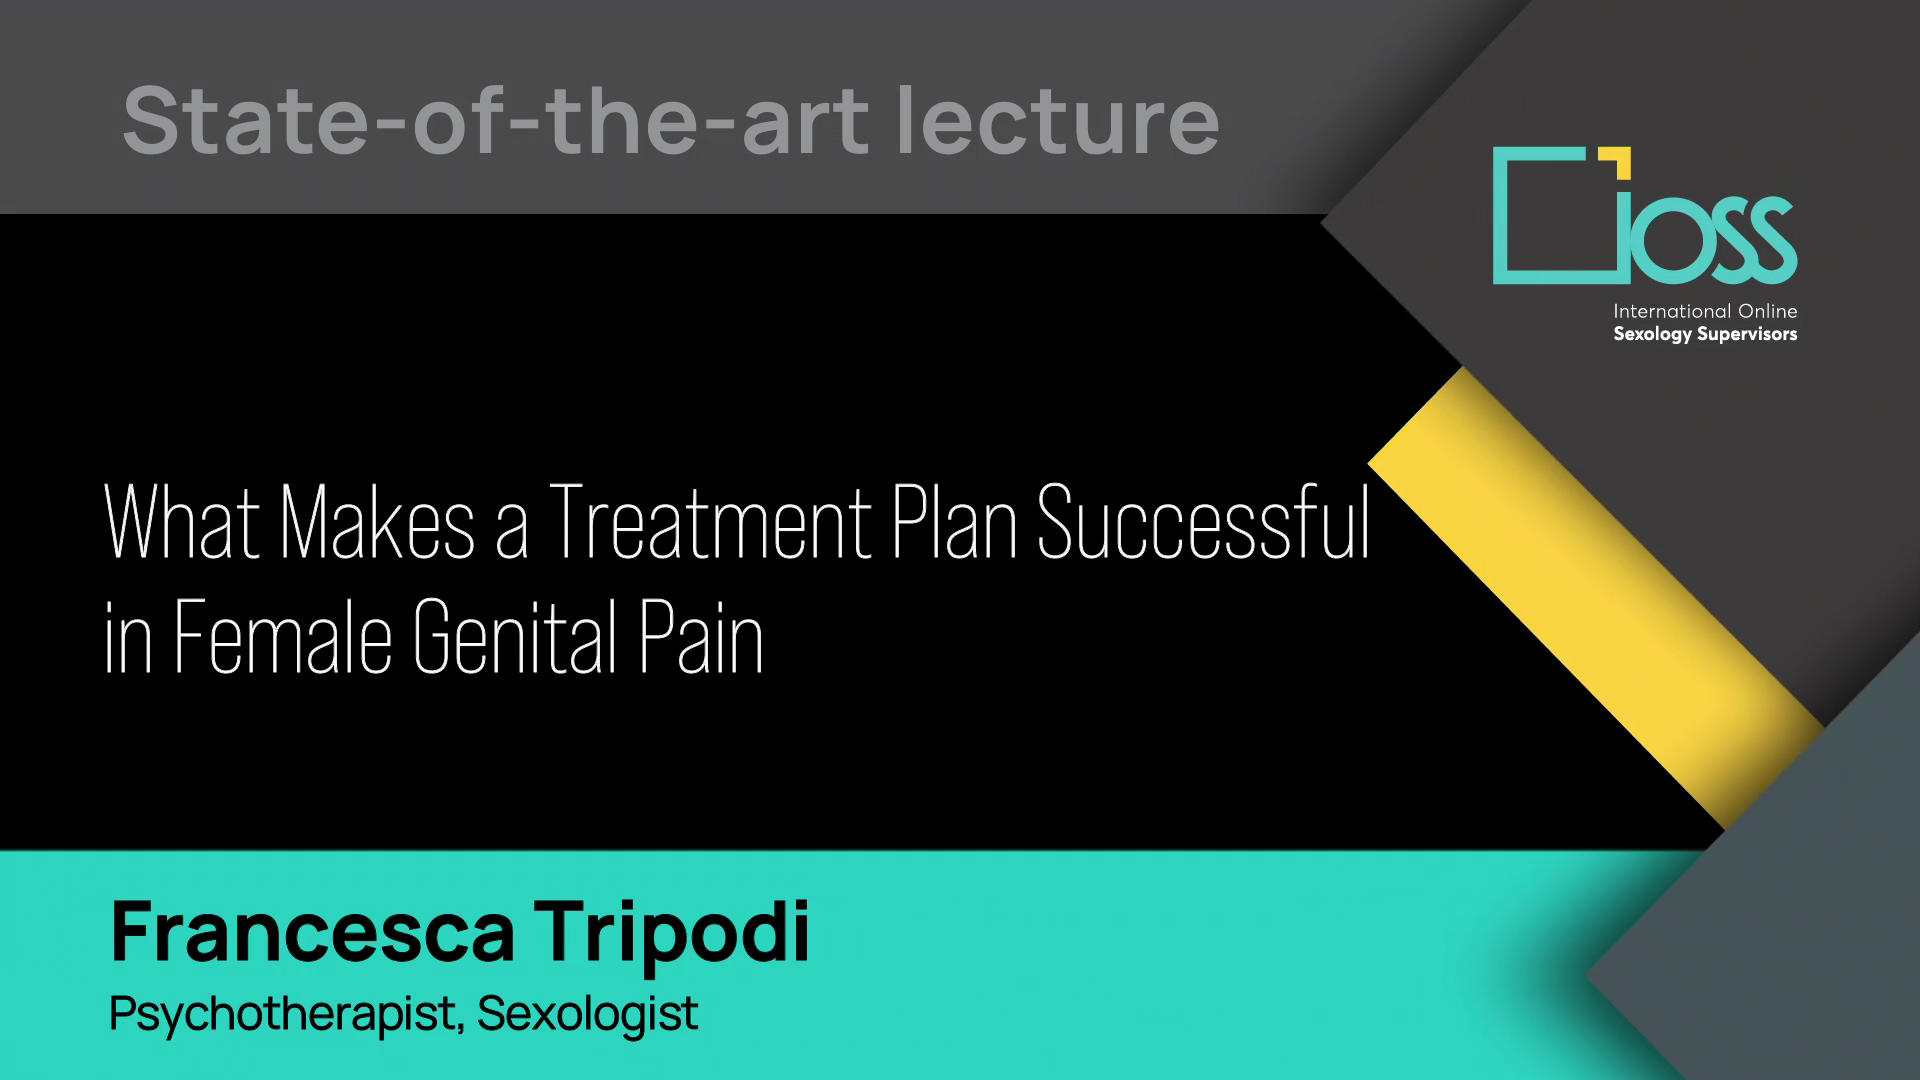 What Makes a Treatment Plan Successful in Female Genital Pain